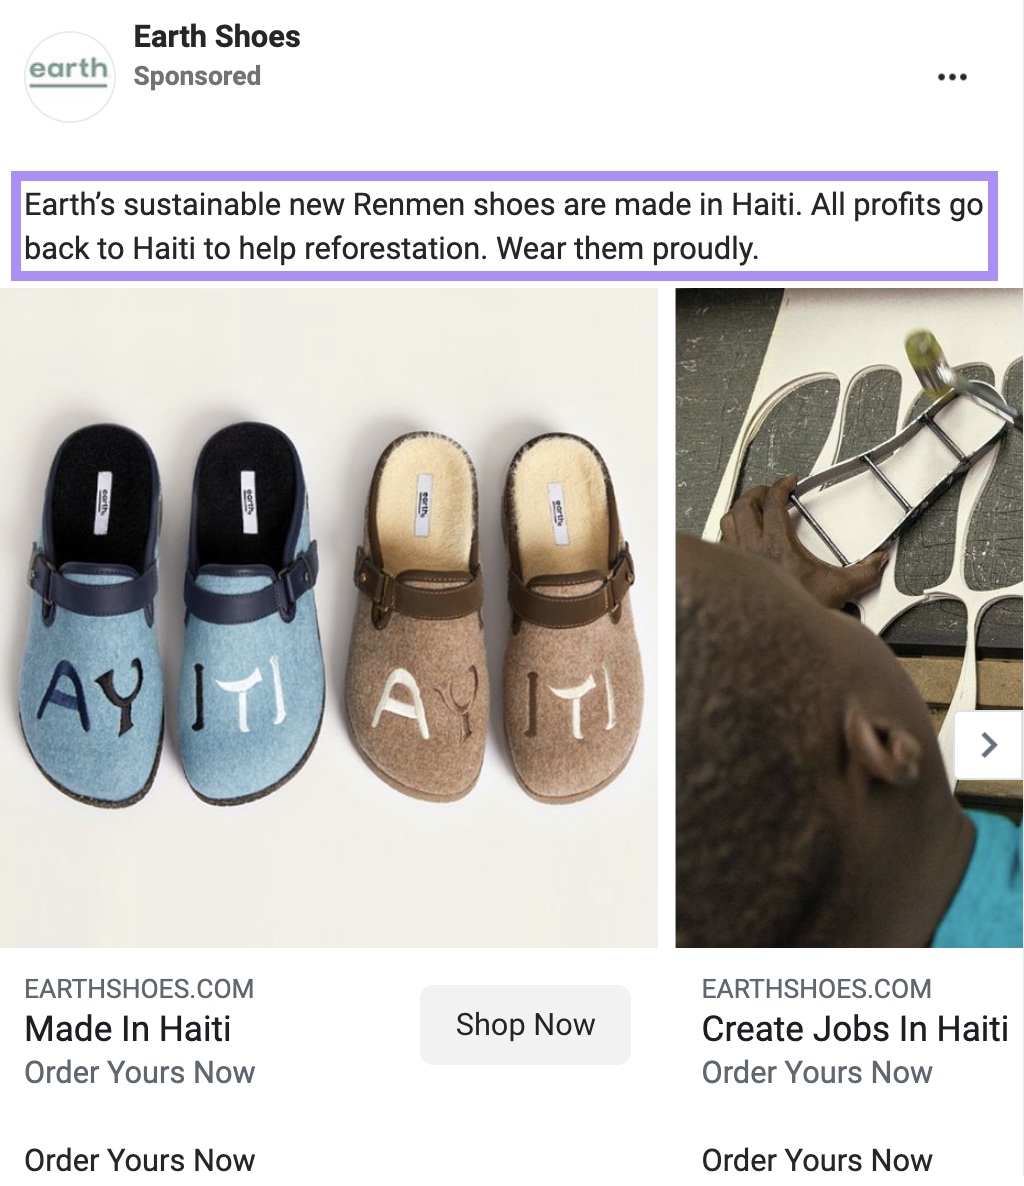 "Earth's sustainable new Renmen shoes are made in Haiti. All profits go back to Haiti to help reforestation. Wear them proudly." copy